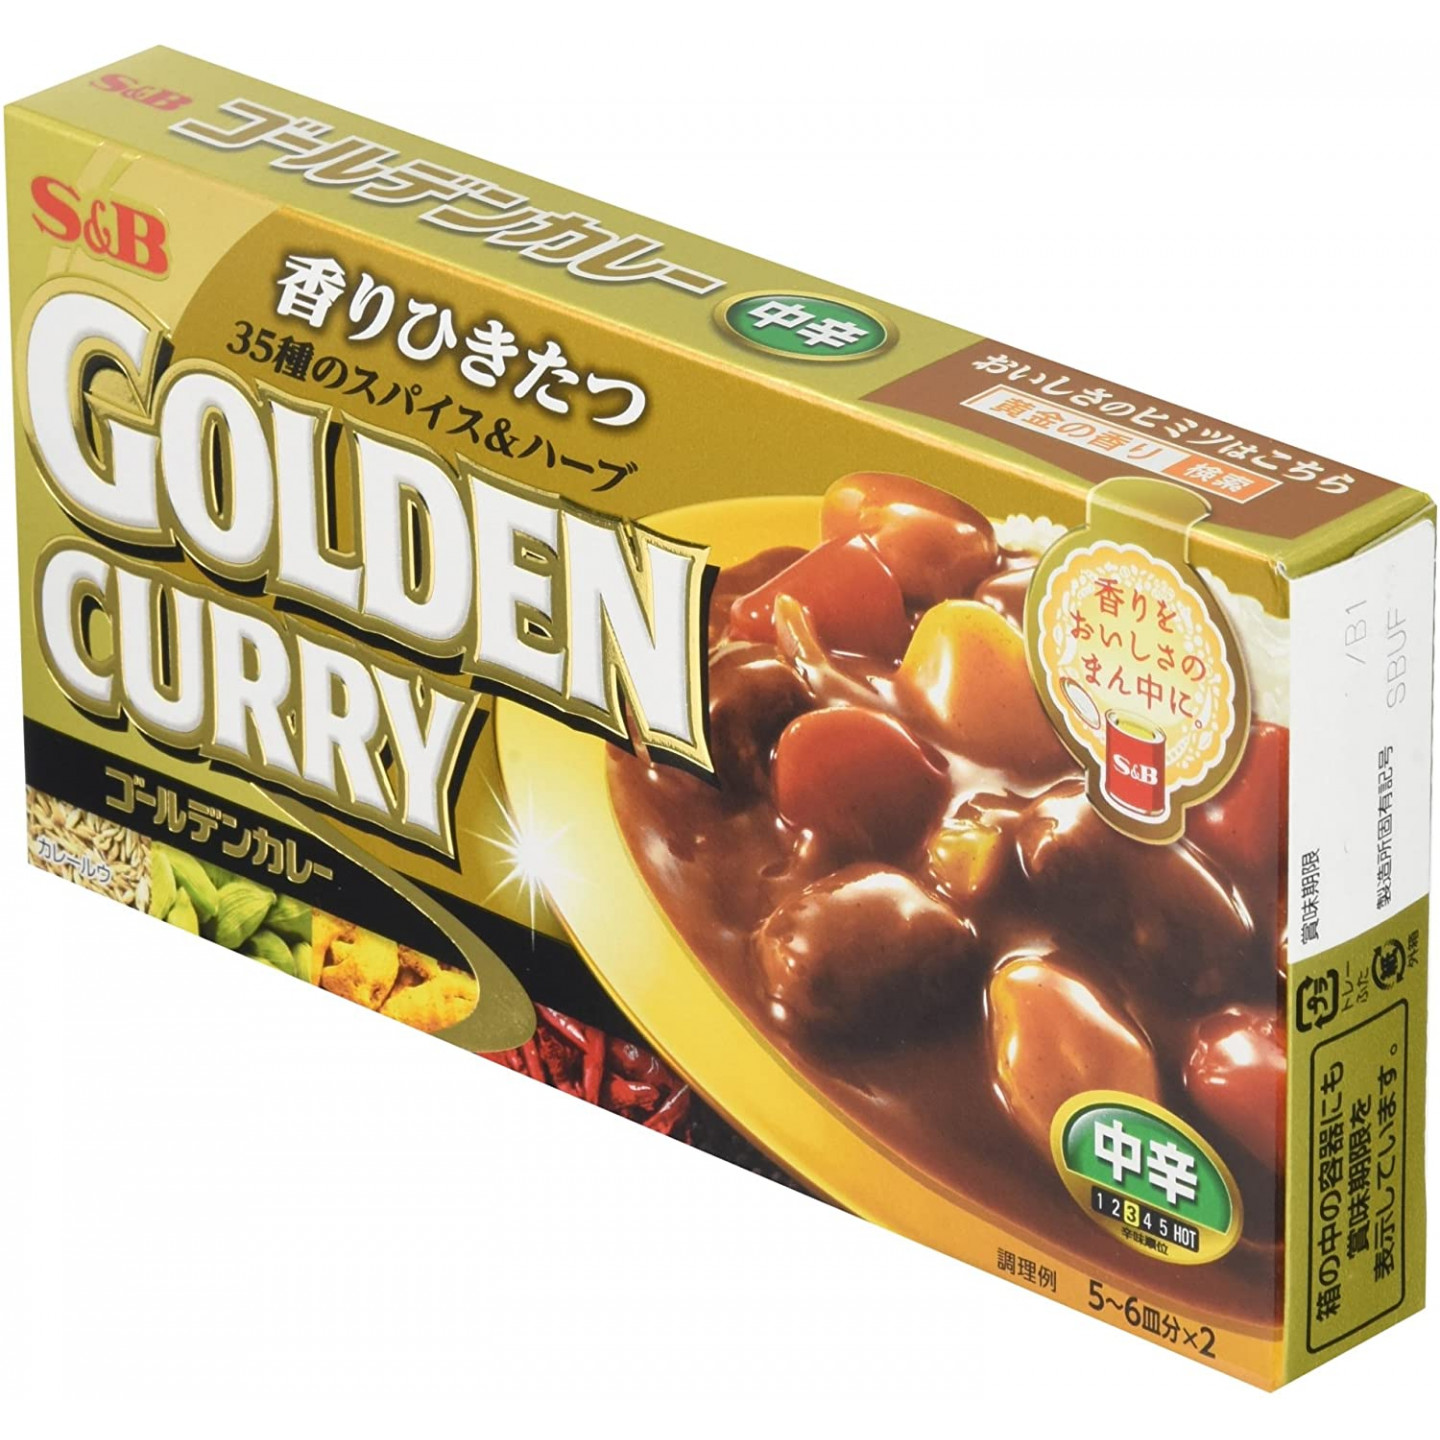 S&B Japanese Golden Curry Medium Hot 1 Servings 200g - Made in